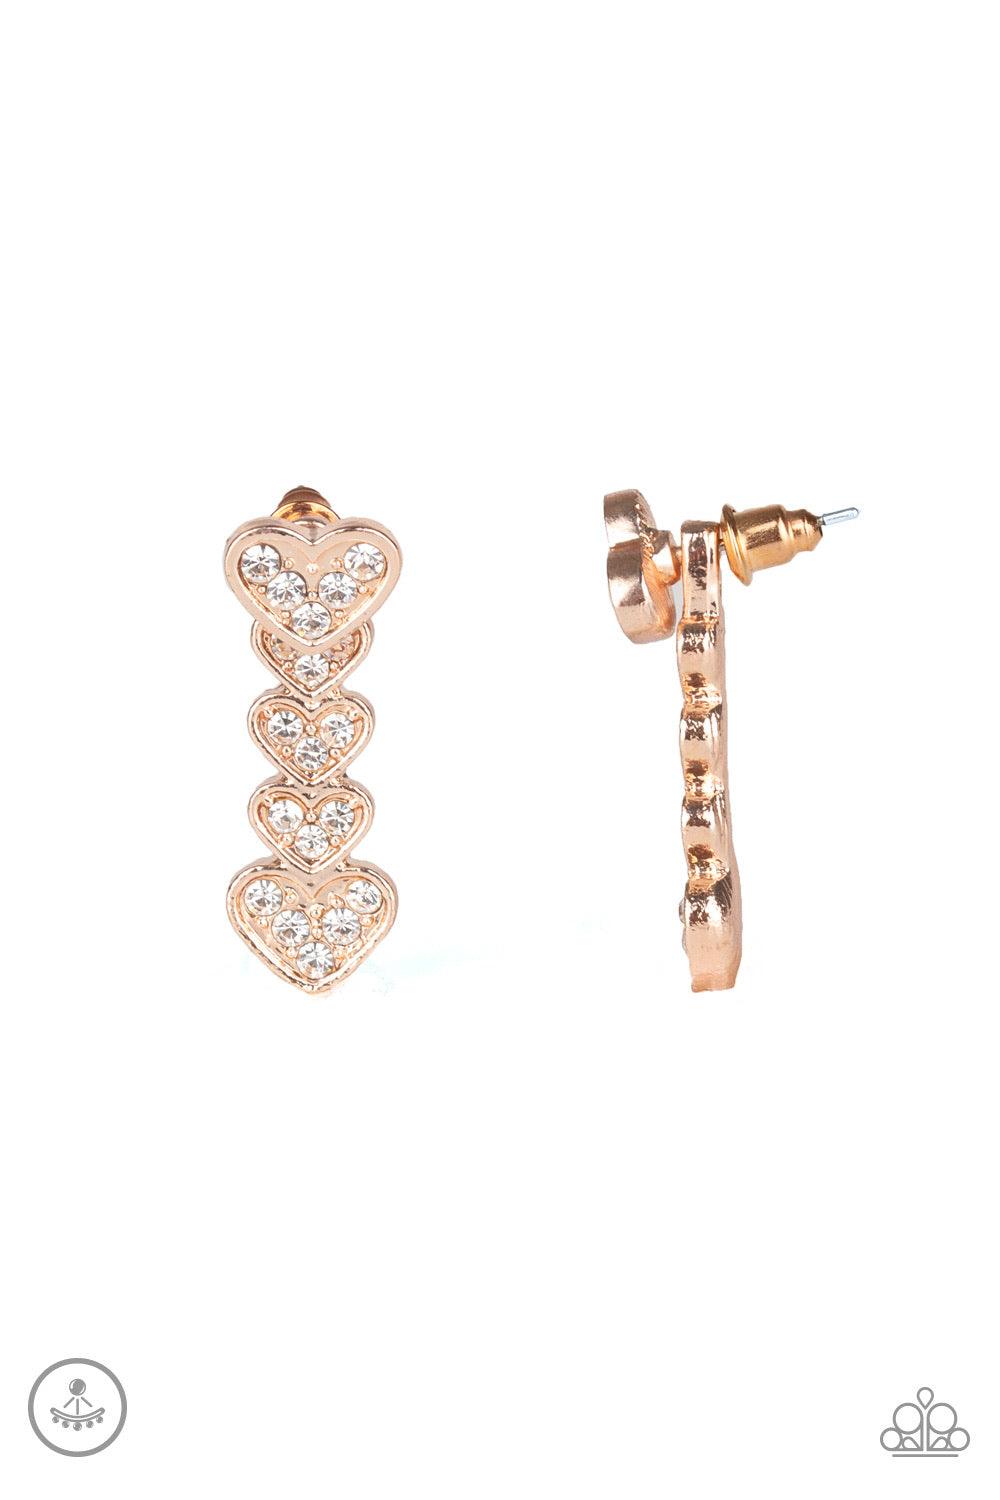 Paparazzi Accessories Heartthrob Twinkle - Rose Gold A white rhinestone encrusted rose gold heart attaches to a double-sided post, designed to fasten behind the ear. Stacked in gradually increasing white rhinestone encrusted heart frames, the glittery dou